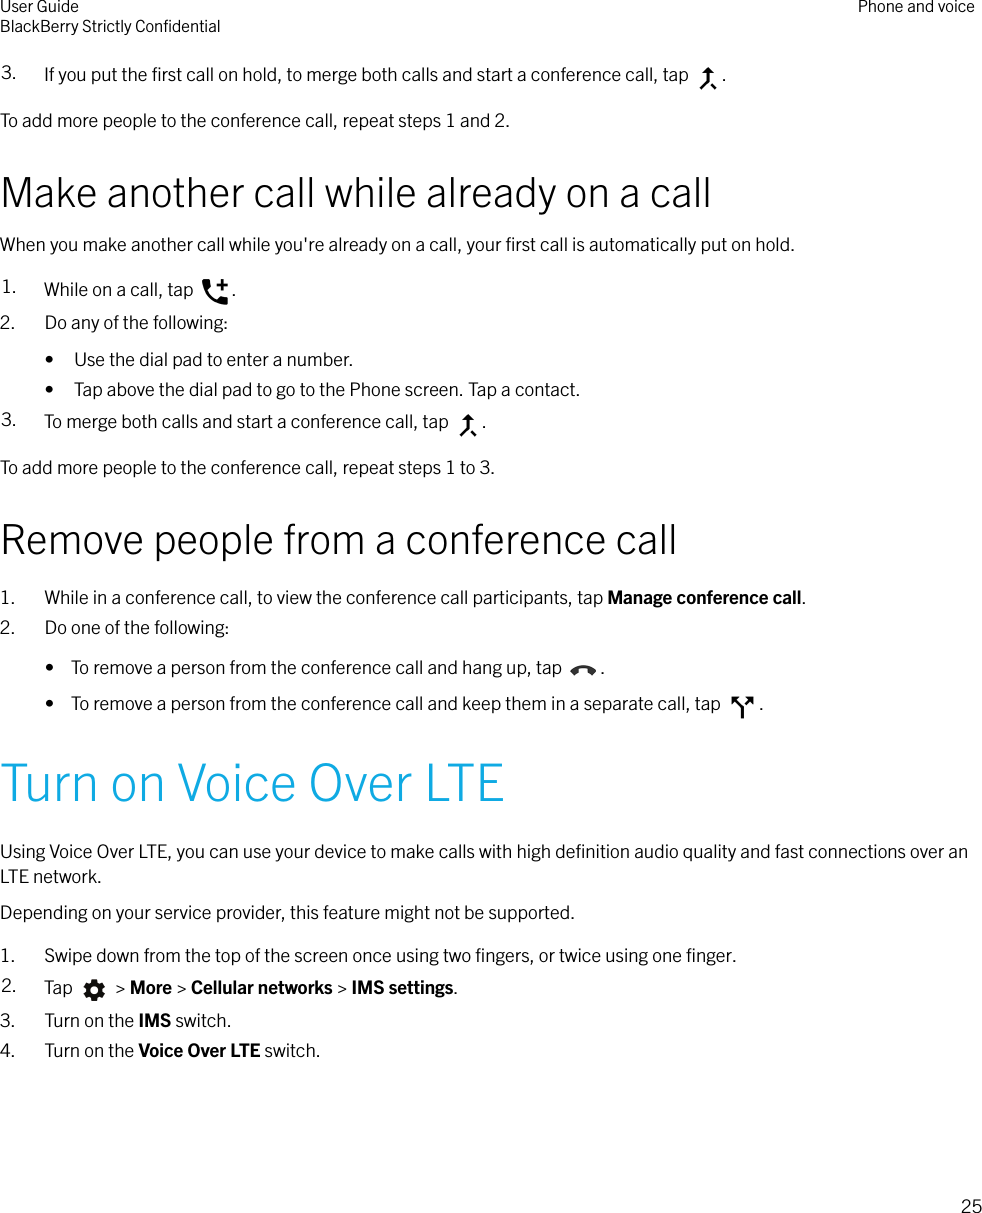 3. If you put the ﬁrst call on hold, to merge both calls and start a conference call, tap  .To add more people to the conference call, repeat steps 1 and 2.Make another call while already on a callWhen you make another call while you&apos;re already on a call, your ﬁrst call is automatically put on hold.1. While on a call, tap  .2. Do any of the following:• Use the dial pad to enter a number.• Tap above the dial pad to go to the Phone screen. Tap a contact.3. To merge both calls and start a conference call, tap  .To add more people to the conference call, repeat steps 1 to 3.Remove people from a conference call1. While in a conference call, to view the conference call participants, tap Manage conference call.2. Do one of the following:•  To remove a person from the conference call and hang up, tap  .•  To remove a person from the conference call and keep them in a separate call, tap  .Turn on Voice Over LTEUsing Voice Over LTE, you can use your device to make calls with high deﬁnition audio quality and fast connections over anLTE network.Depending on your service provider, this feature might not be supported.1. Swipe down from the top of the screen once using two ﬁngers, or twice using one ﬁnger.2. Tap   &gt; More &gt; Cellular networks &gt; IMS settings.3. Turn on the IMS switch.4. Turn on the Voice Over LTE switch.User GuideBlackBerry Strictly ConﬁdentialPhone and voice25